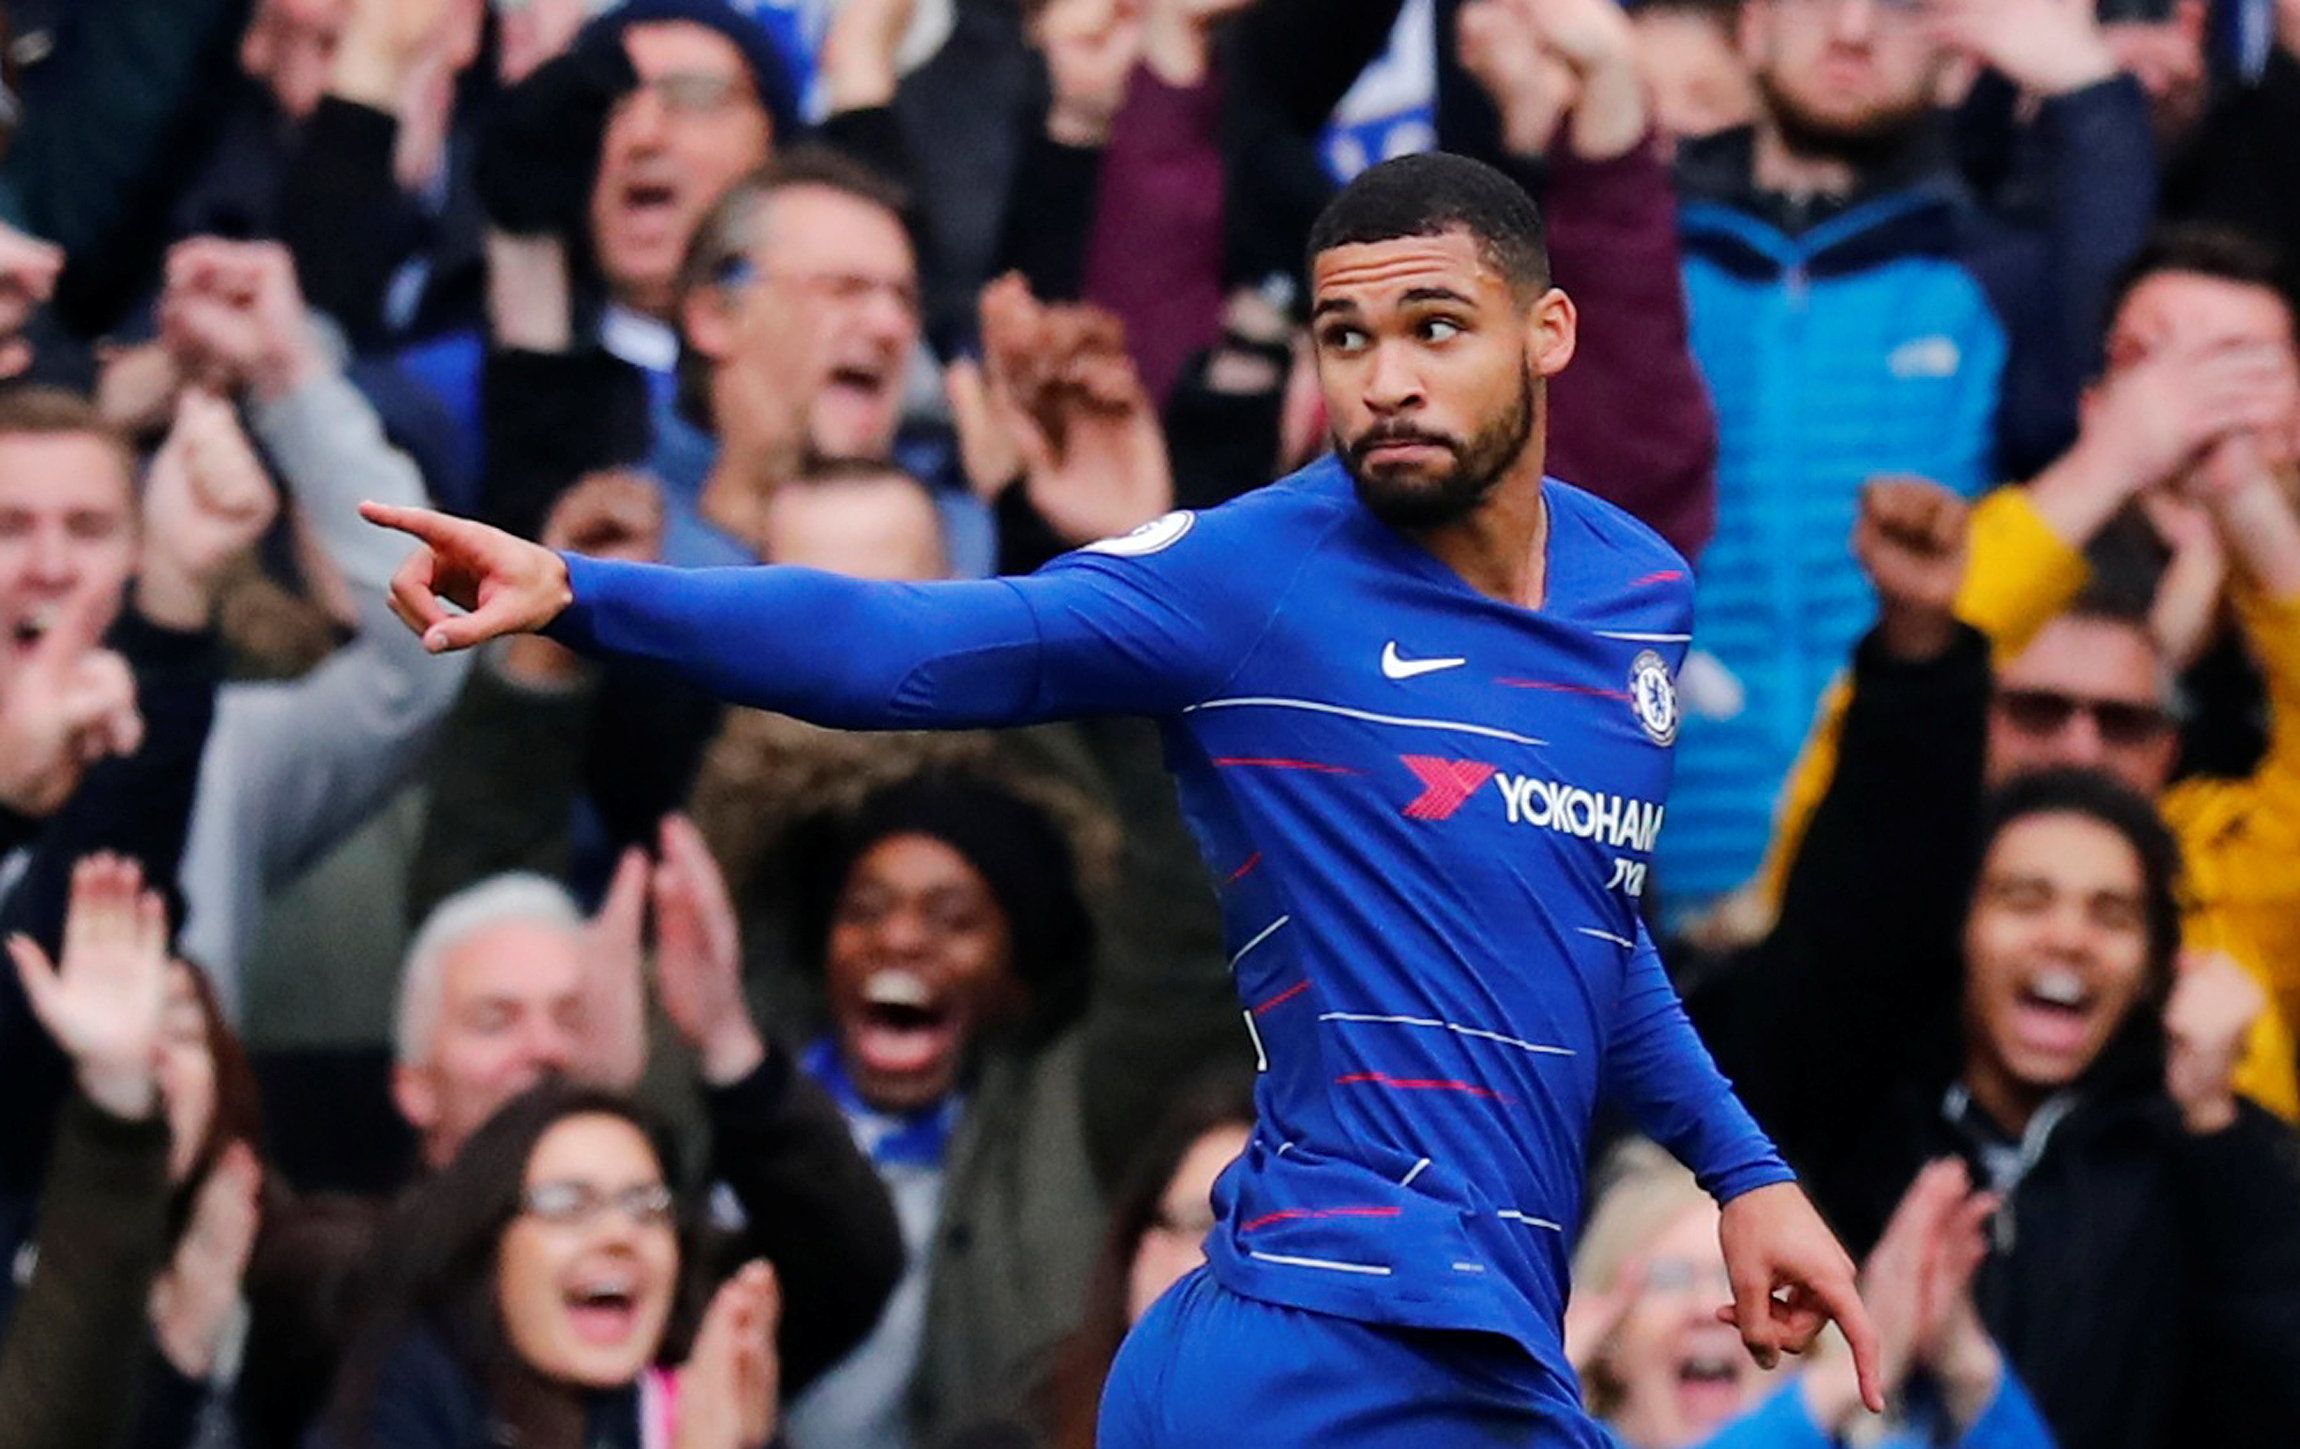 Soccer Football - Premier League - Chelsea v Fulham - Stamford Bridge, London, Britain - December 2, 2018  Chelsea's Ruben Loftus-Cheek celebrates scoring their second goal   REUTERS/Eddie Keogh  EDITORIAL USE ONLY. No use with unauthorized audio, video, data, fixture lists, club/league logos or "live" services. Online in-match use limited to 75 images, no video emulation. No use in betting, games or single club/league/player publications.  Please contact your account representative for further 